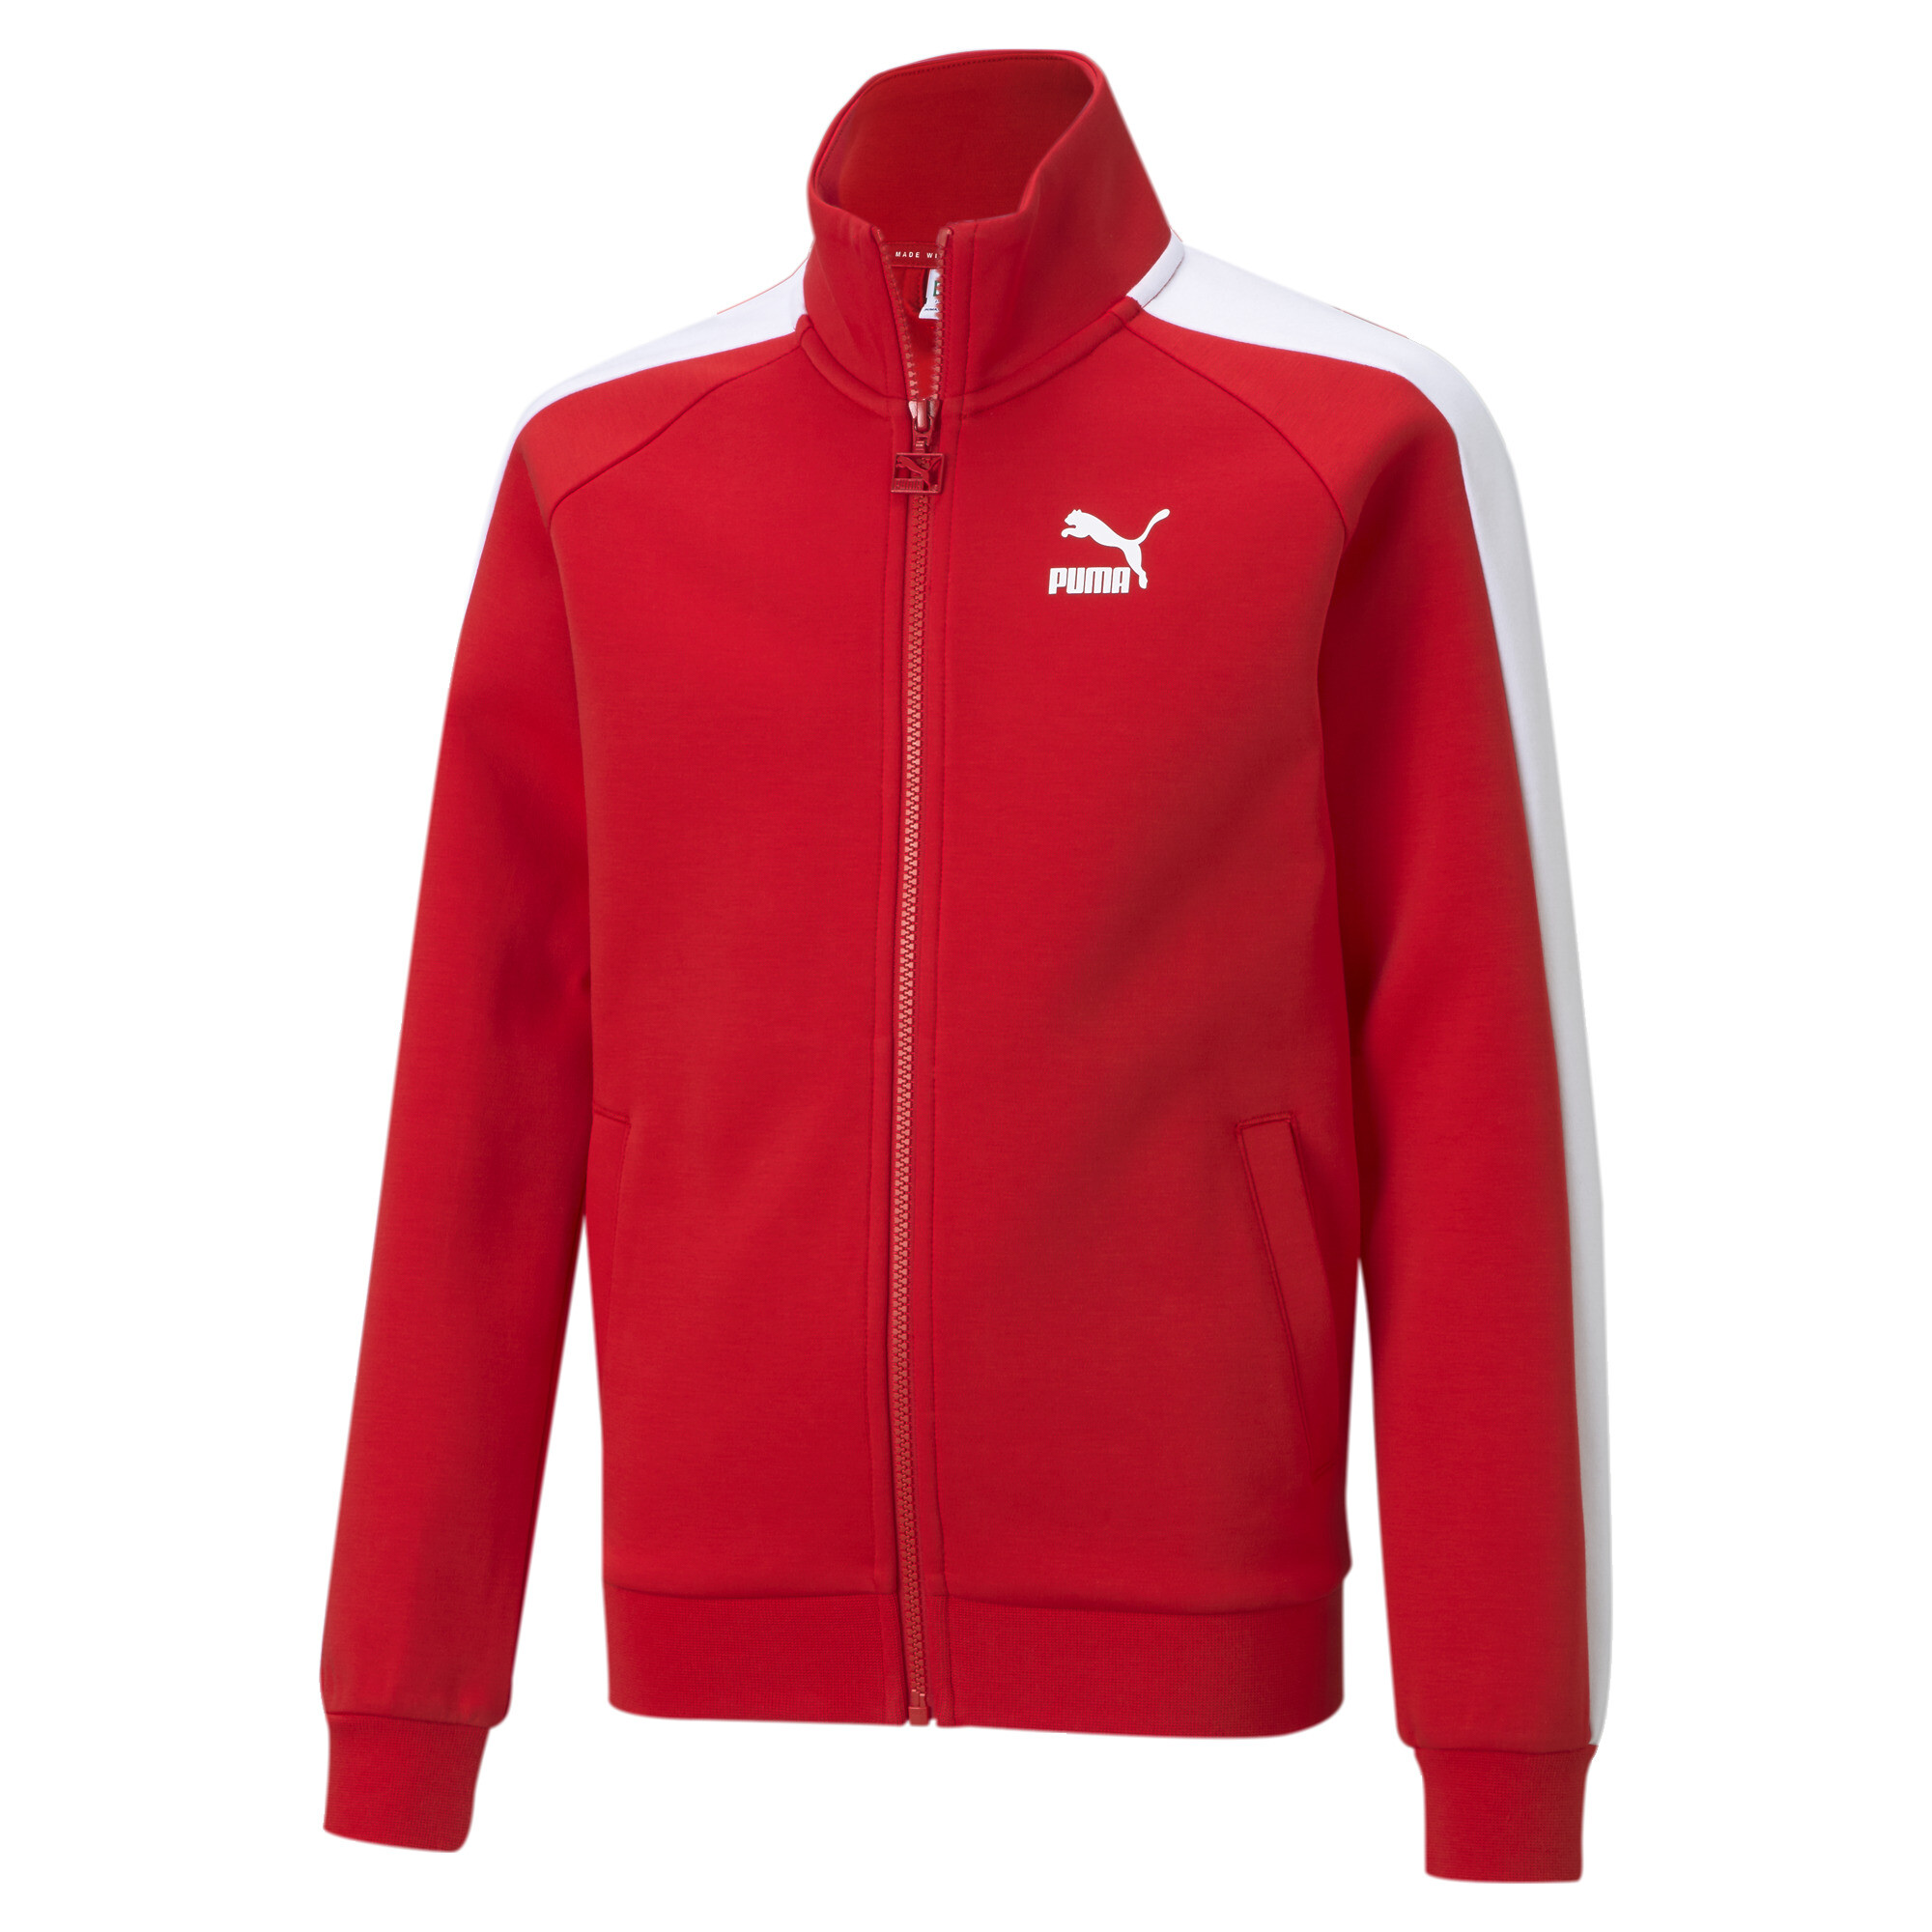 PUMA Iconic T7 Track Jacket In Red, Size 5-6 Youth